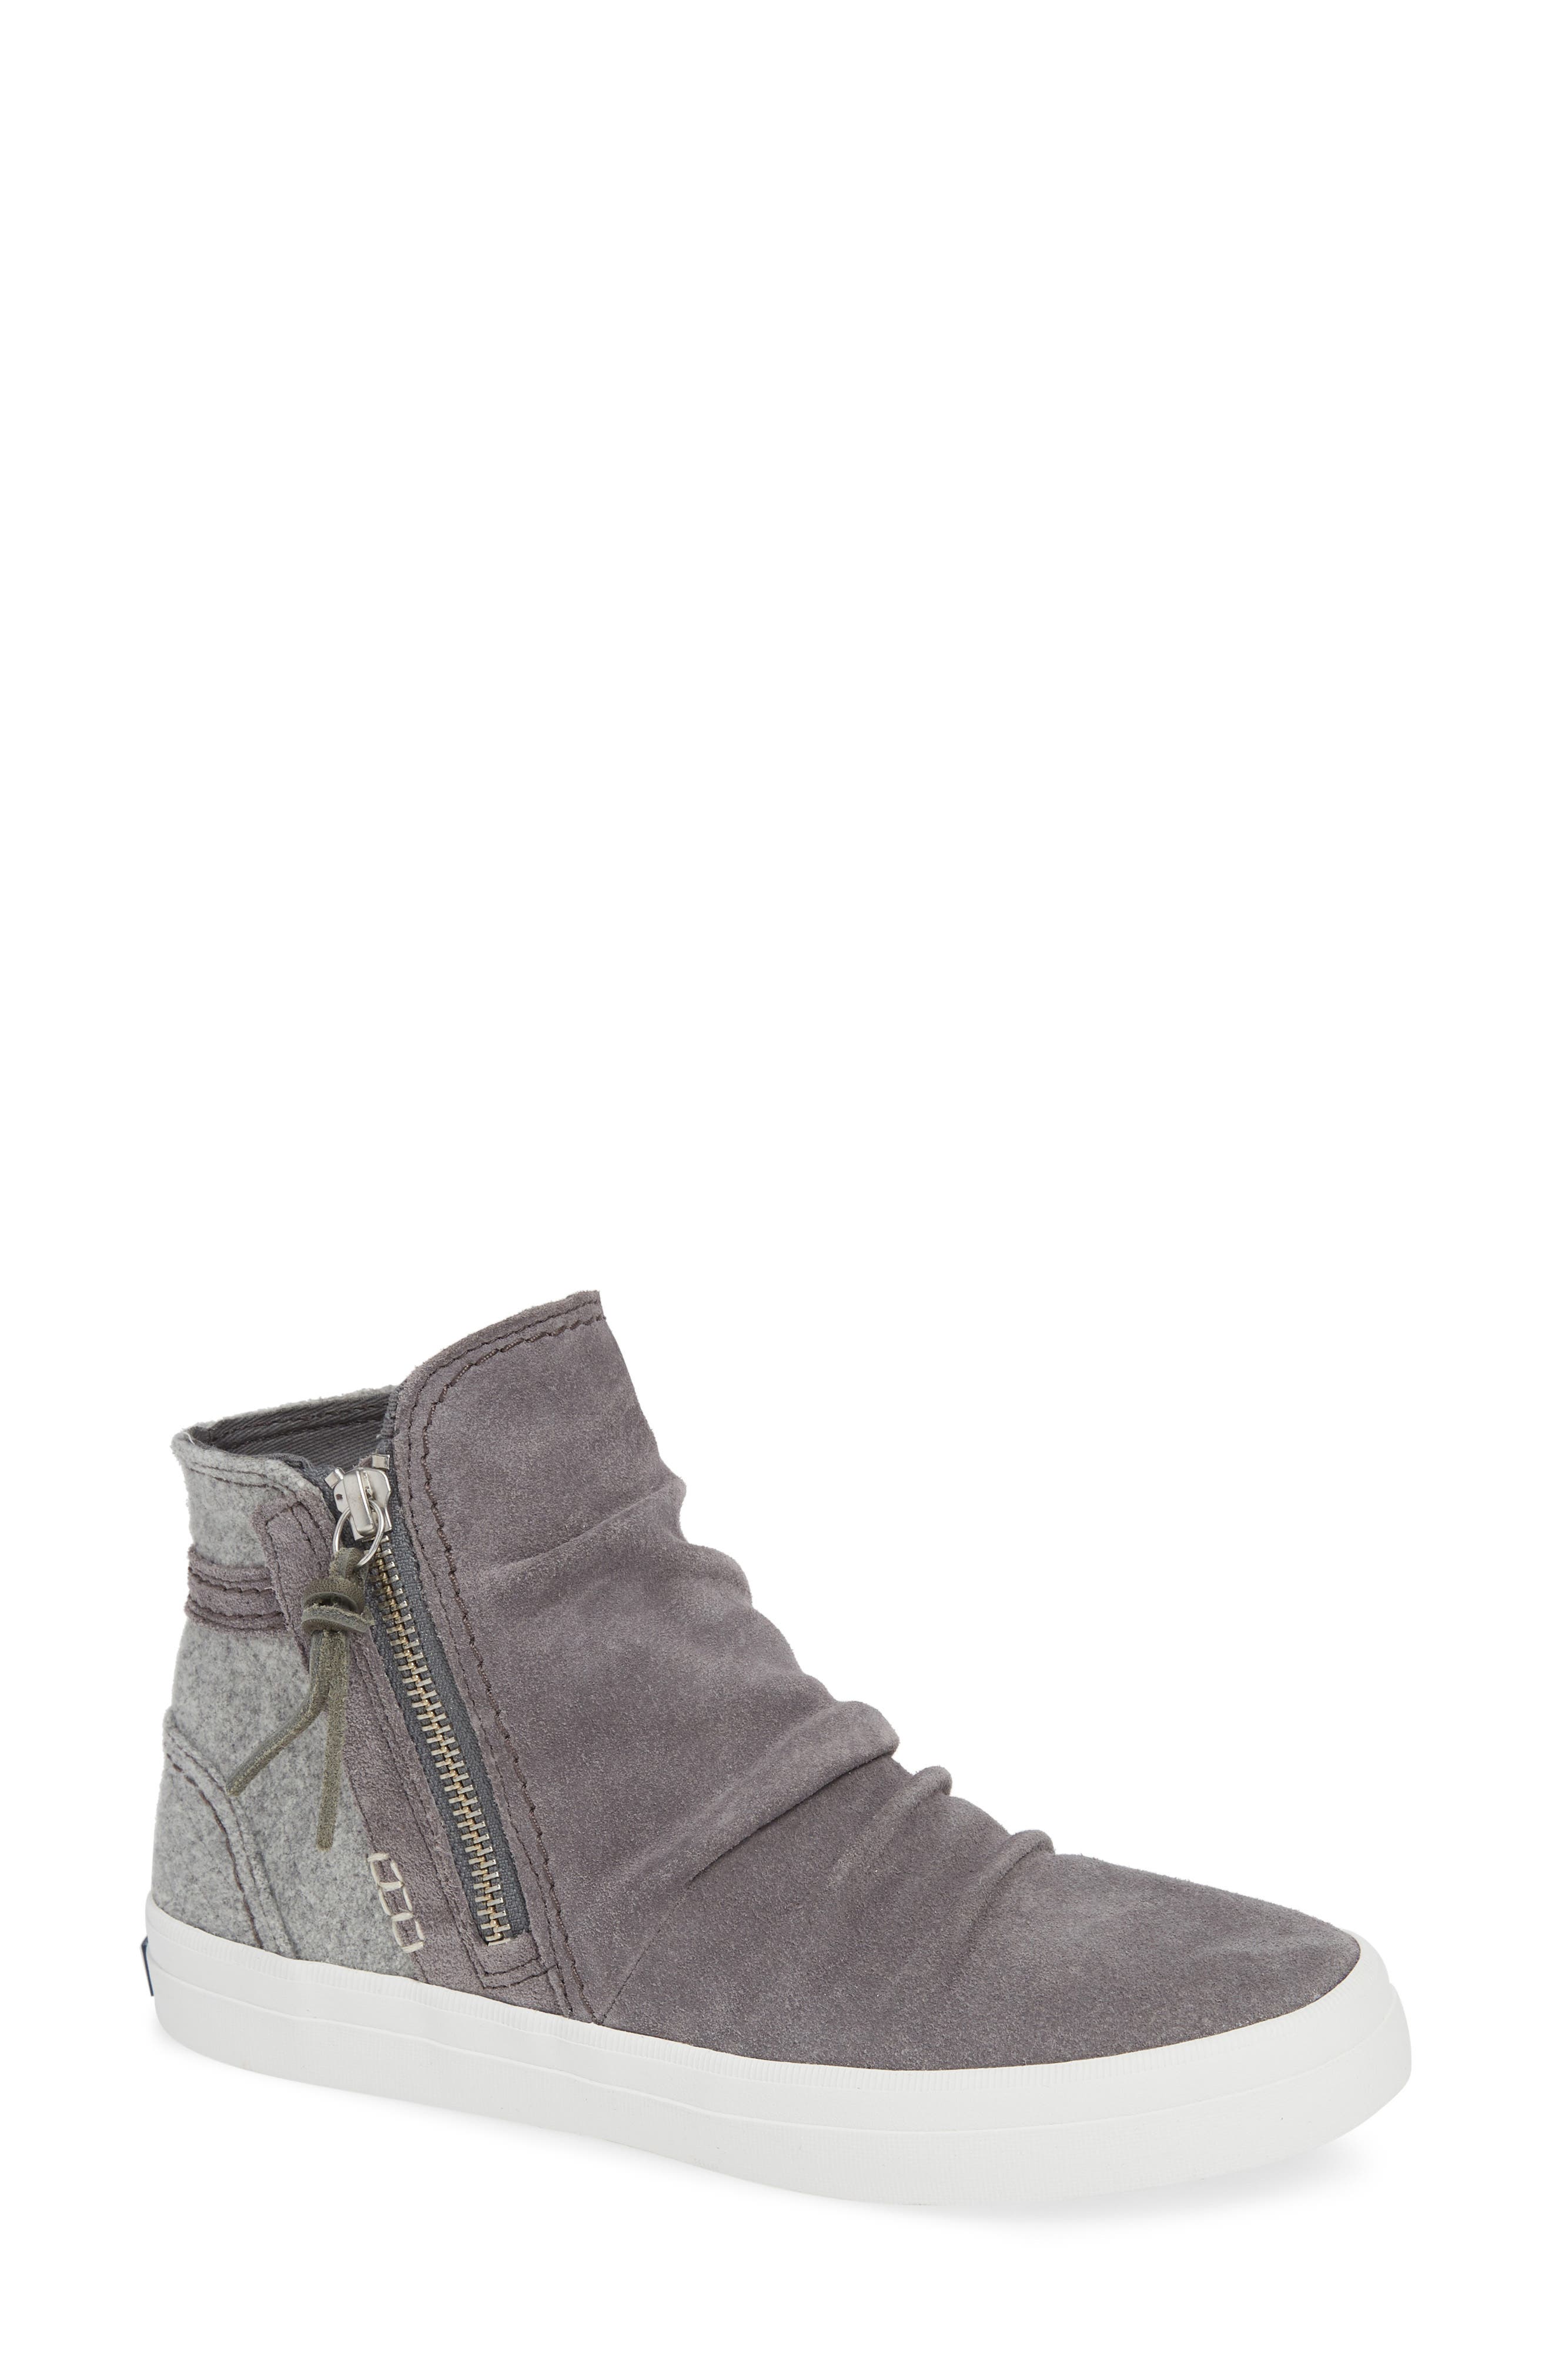 sperry crest zone high top